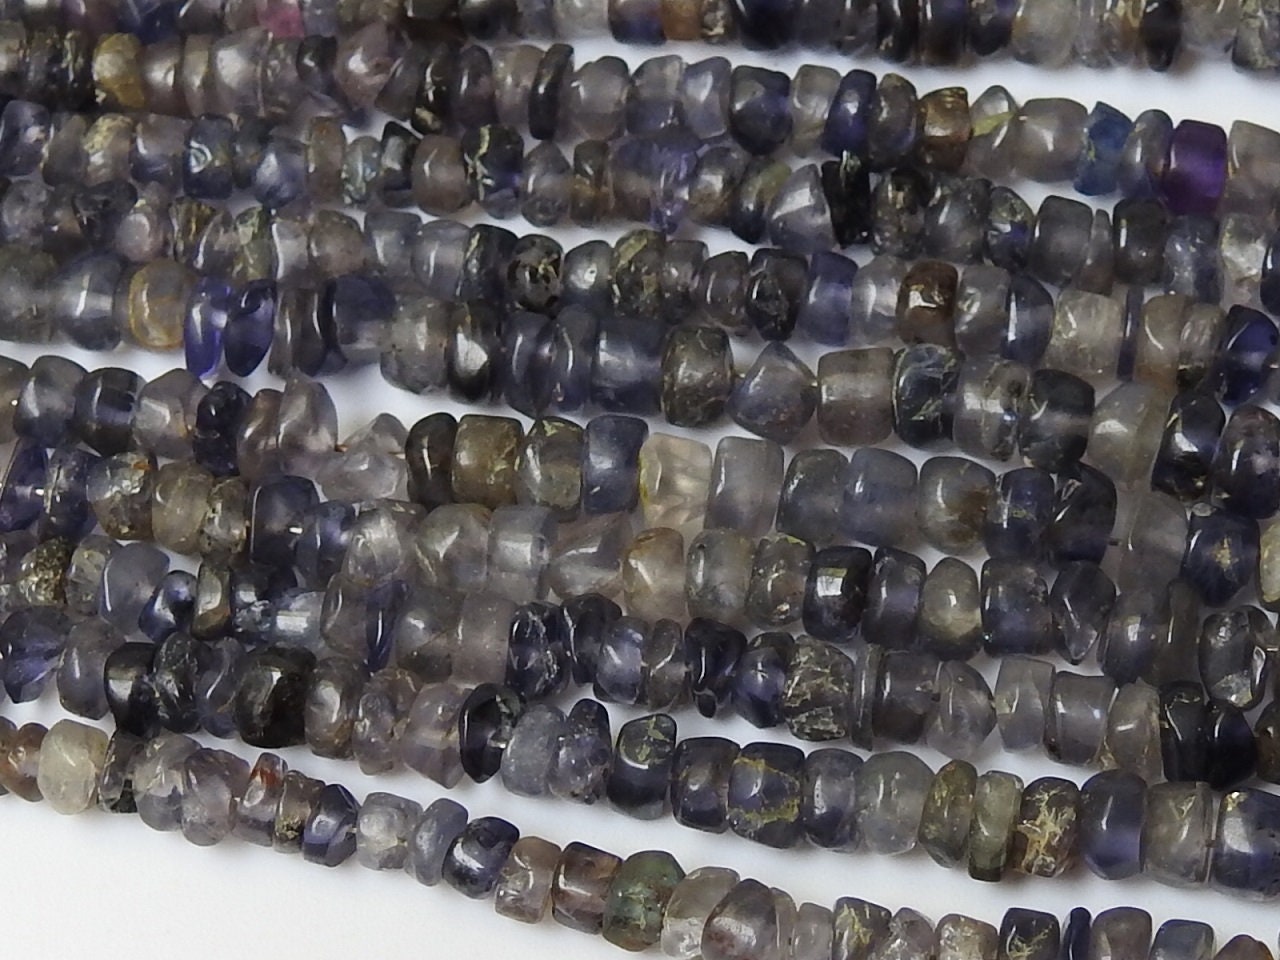 Natural Blue Iolite Smooth Handmade Beads,Roundel Shape,Loose Stone,For Making Jewelry,Wholesale Price,New Arrival,16Inch Strand B10 | Save 33% - Rajasthan Living 16